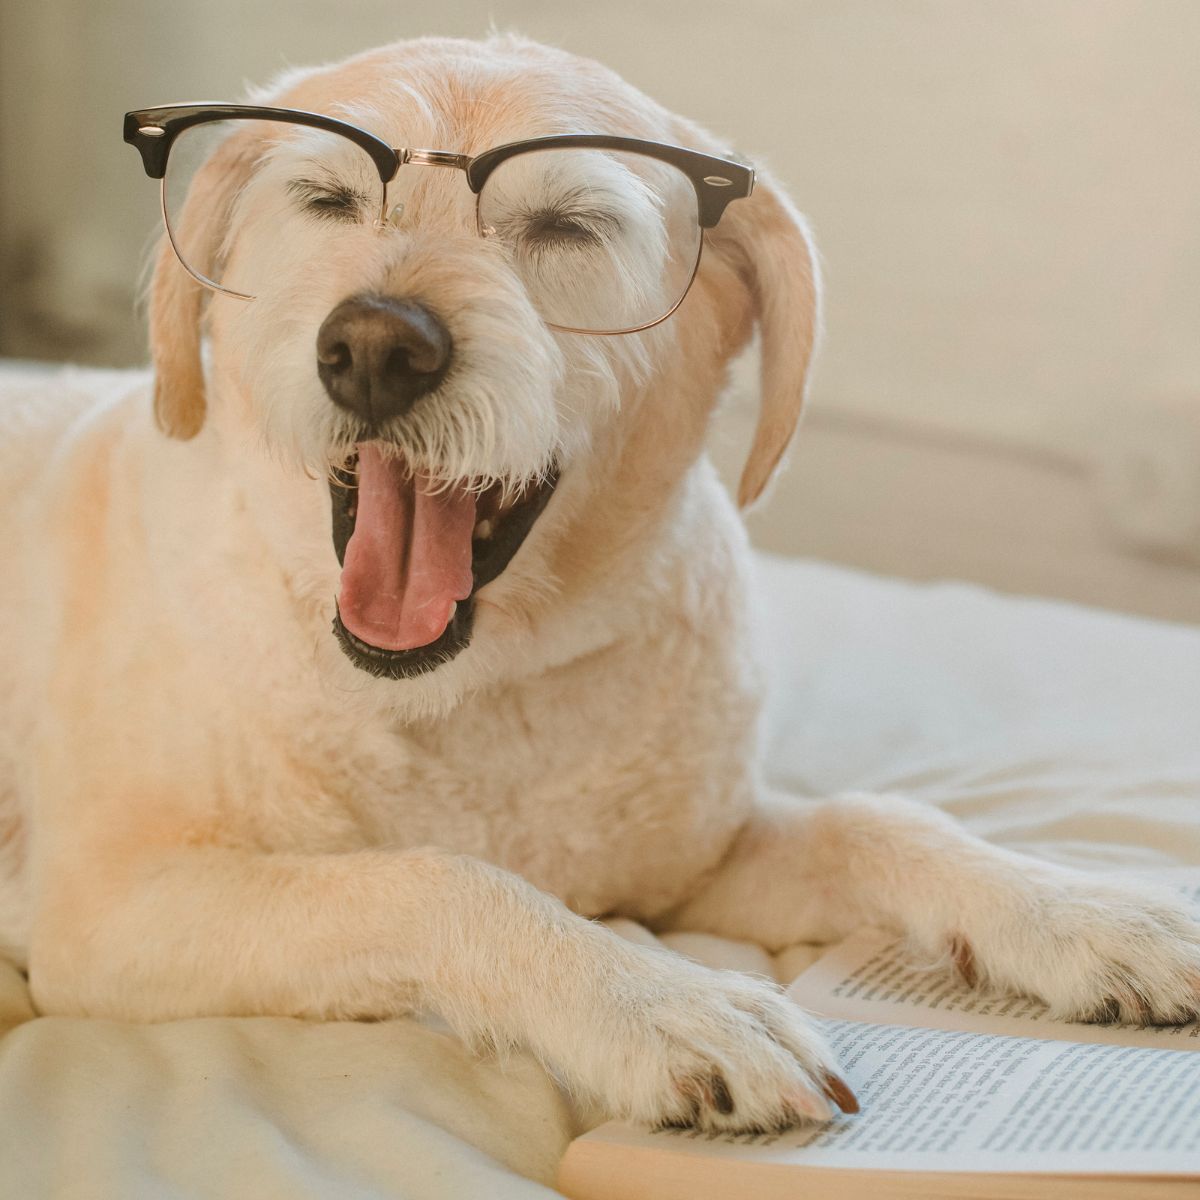 Dog with glasses on and mouth open and has a book open with it's paws